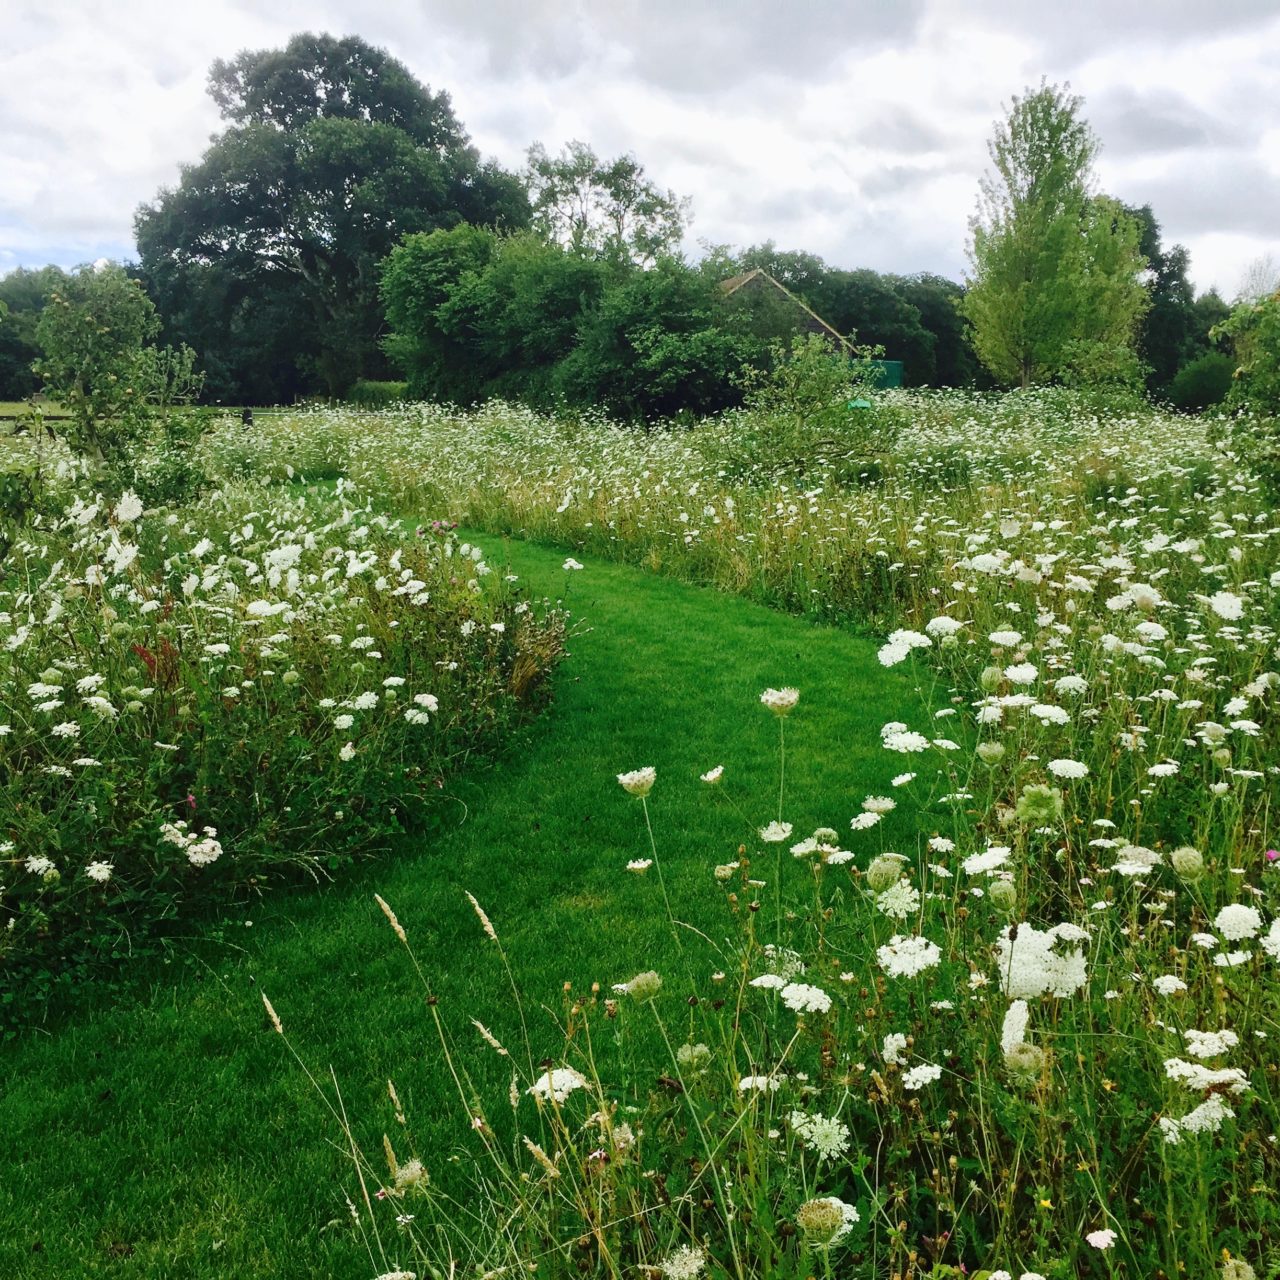 This is a new wild flower meadow with a wide mown path